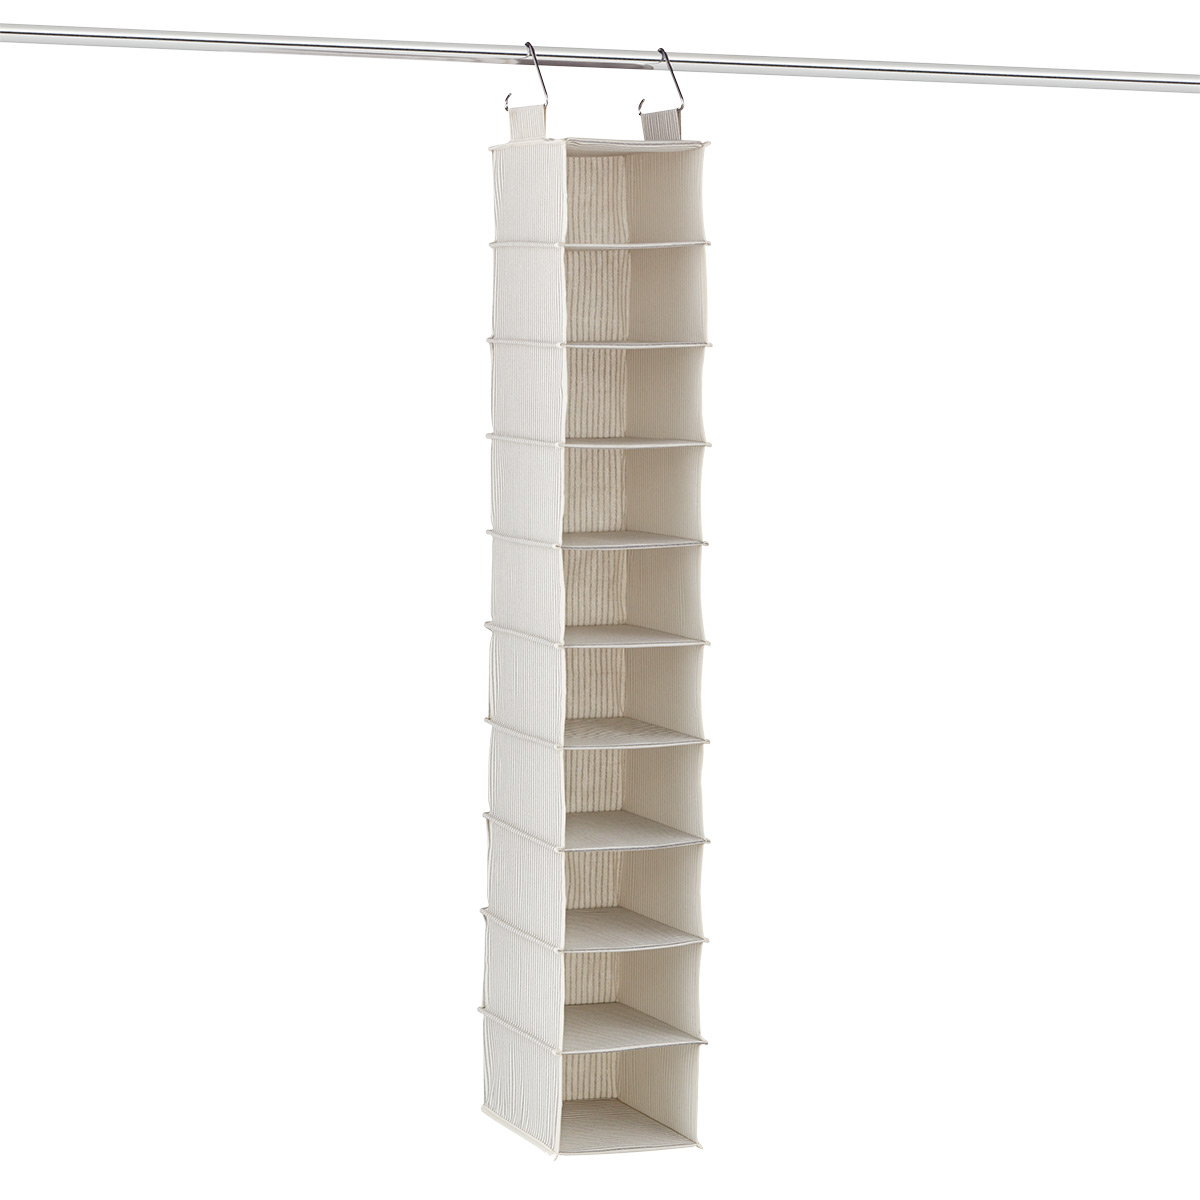 https://www.containerstore.com/catalogimages/482702/10091532-10-compartment-hanging-clos.jpg